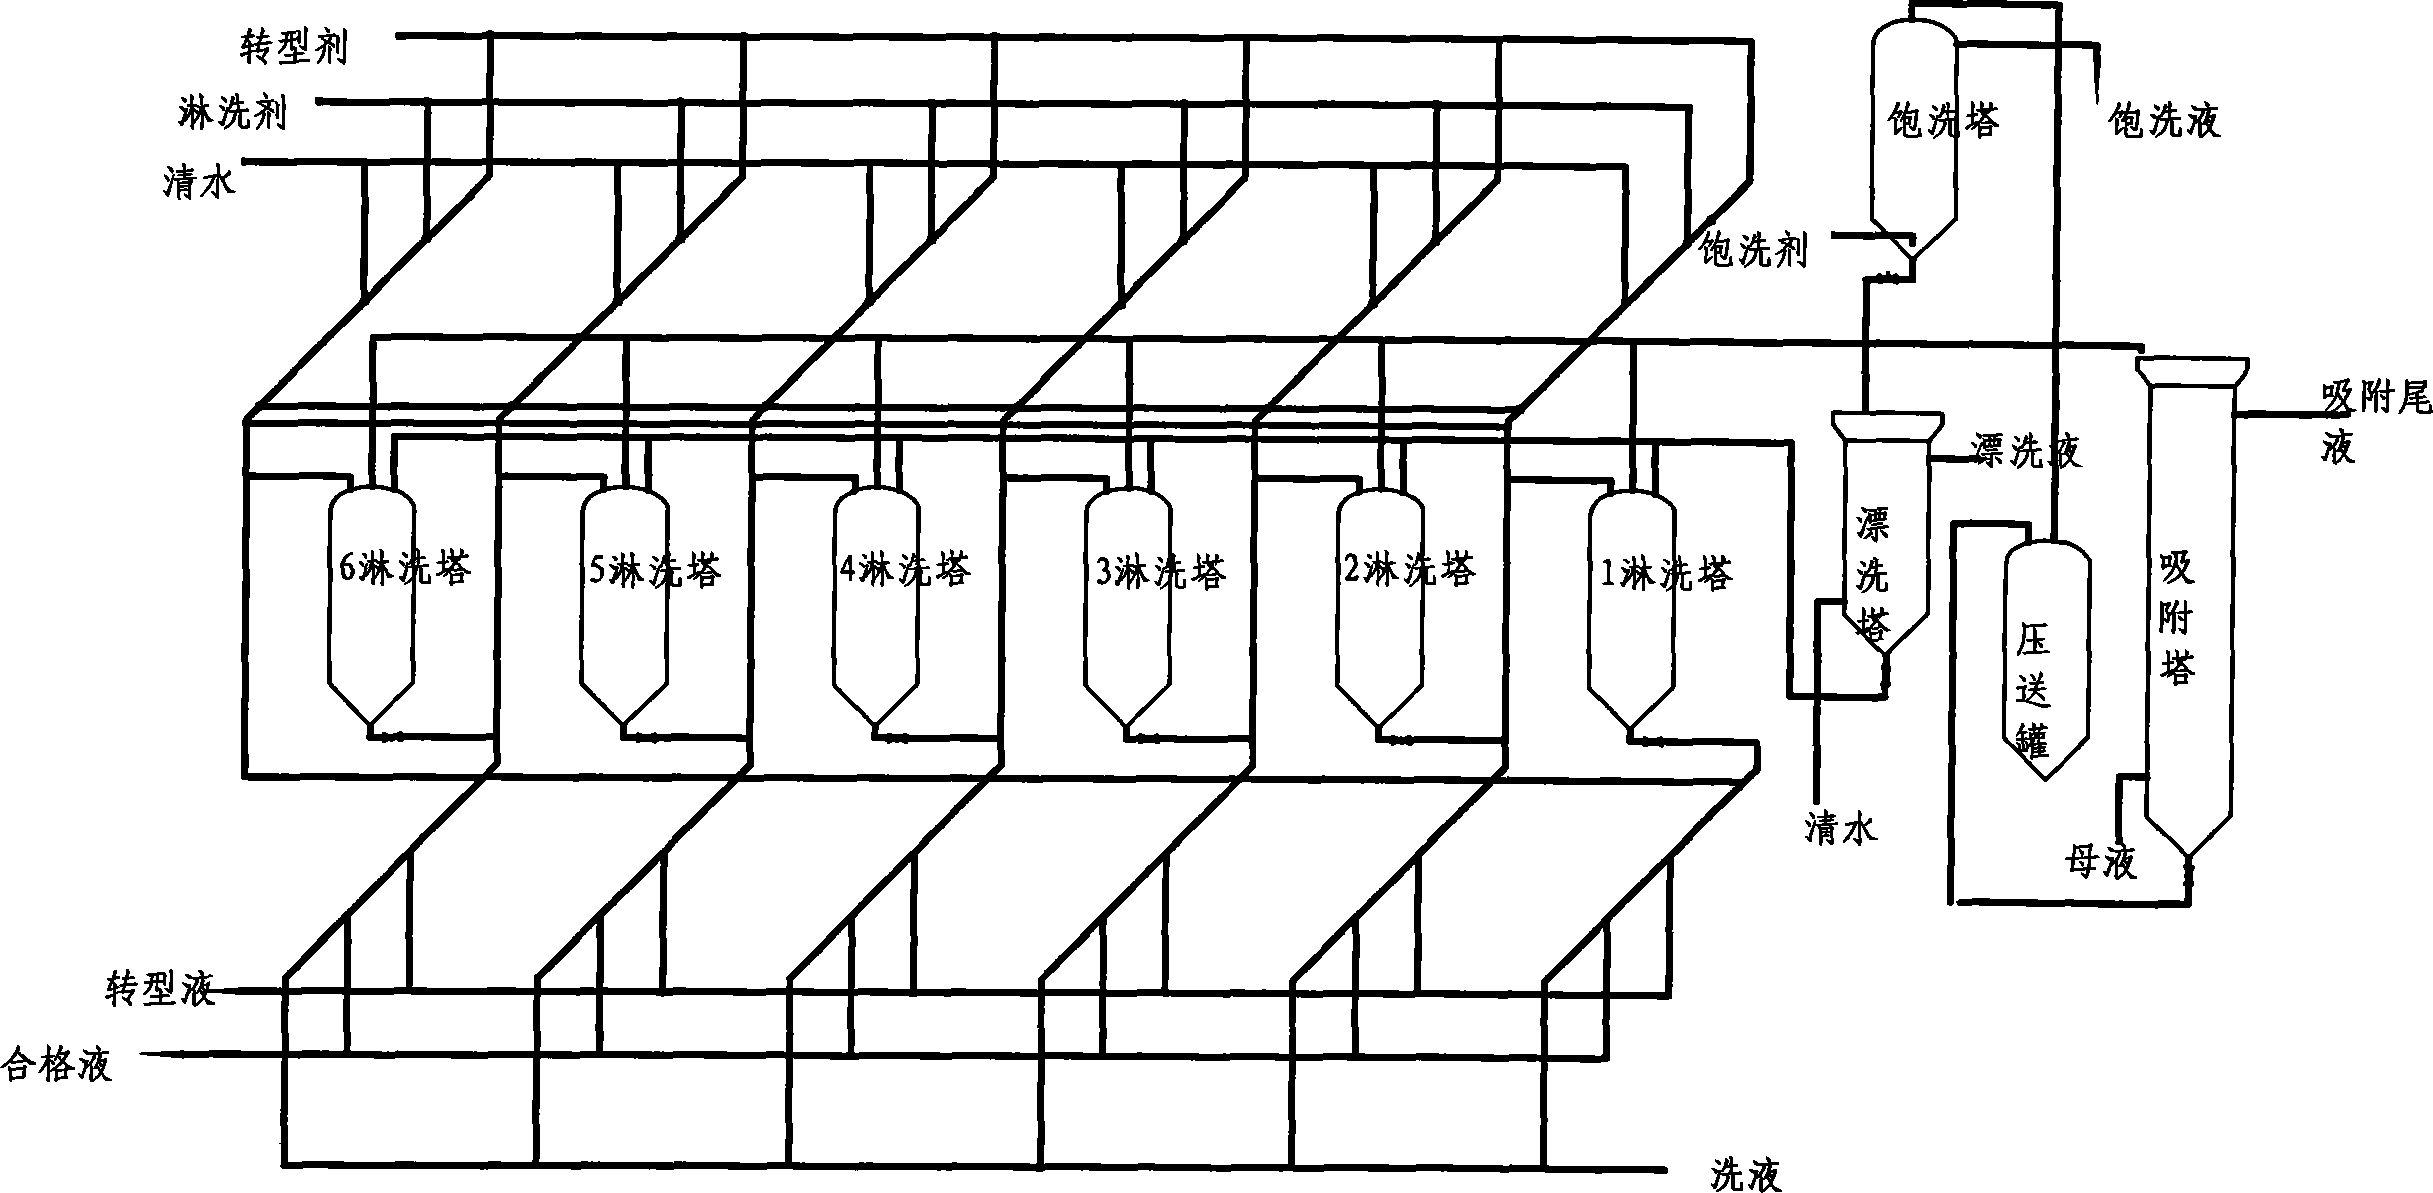 Ion exchanging method for extracting gallium from alumina production process